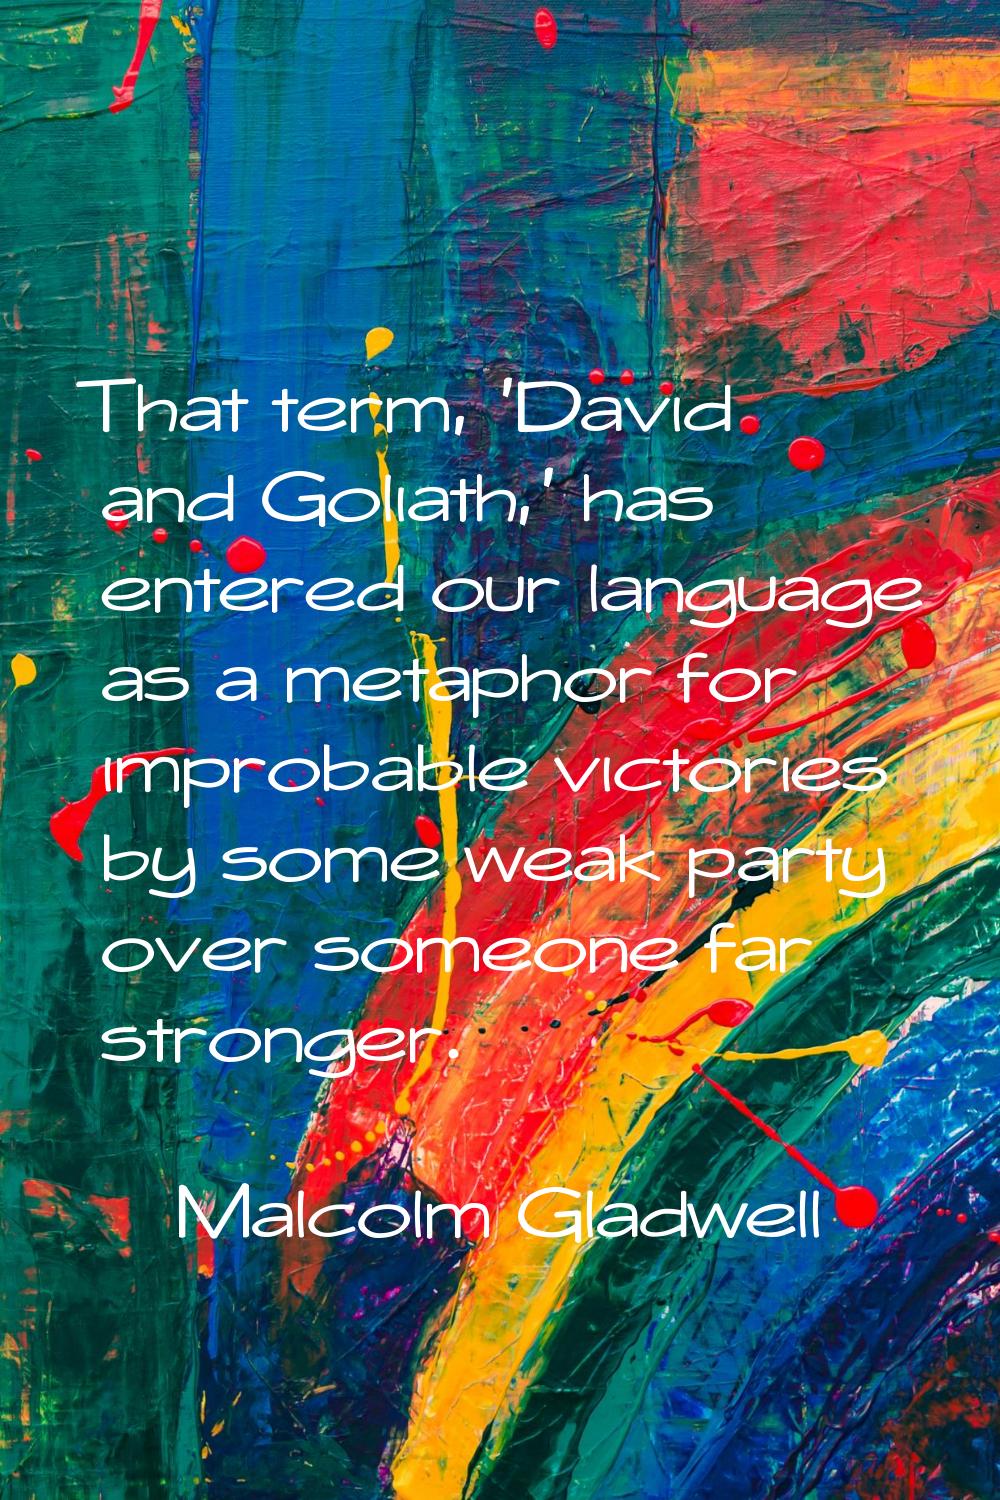 That term, 'David and Goliath,' has entered our language as a metaphor for improbable victories by 